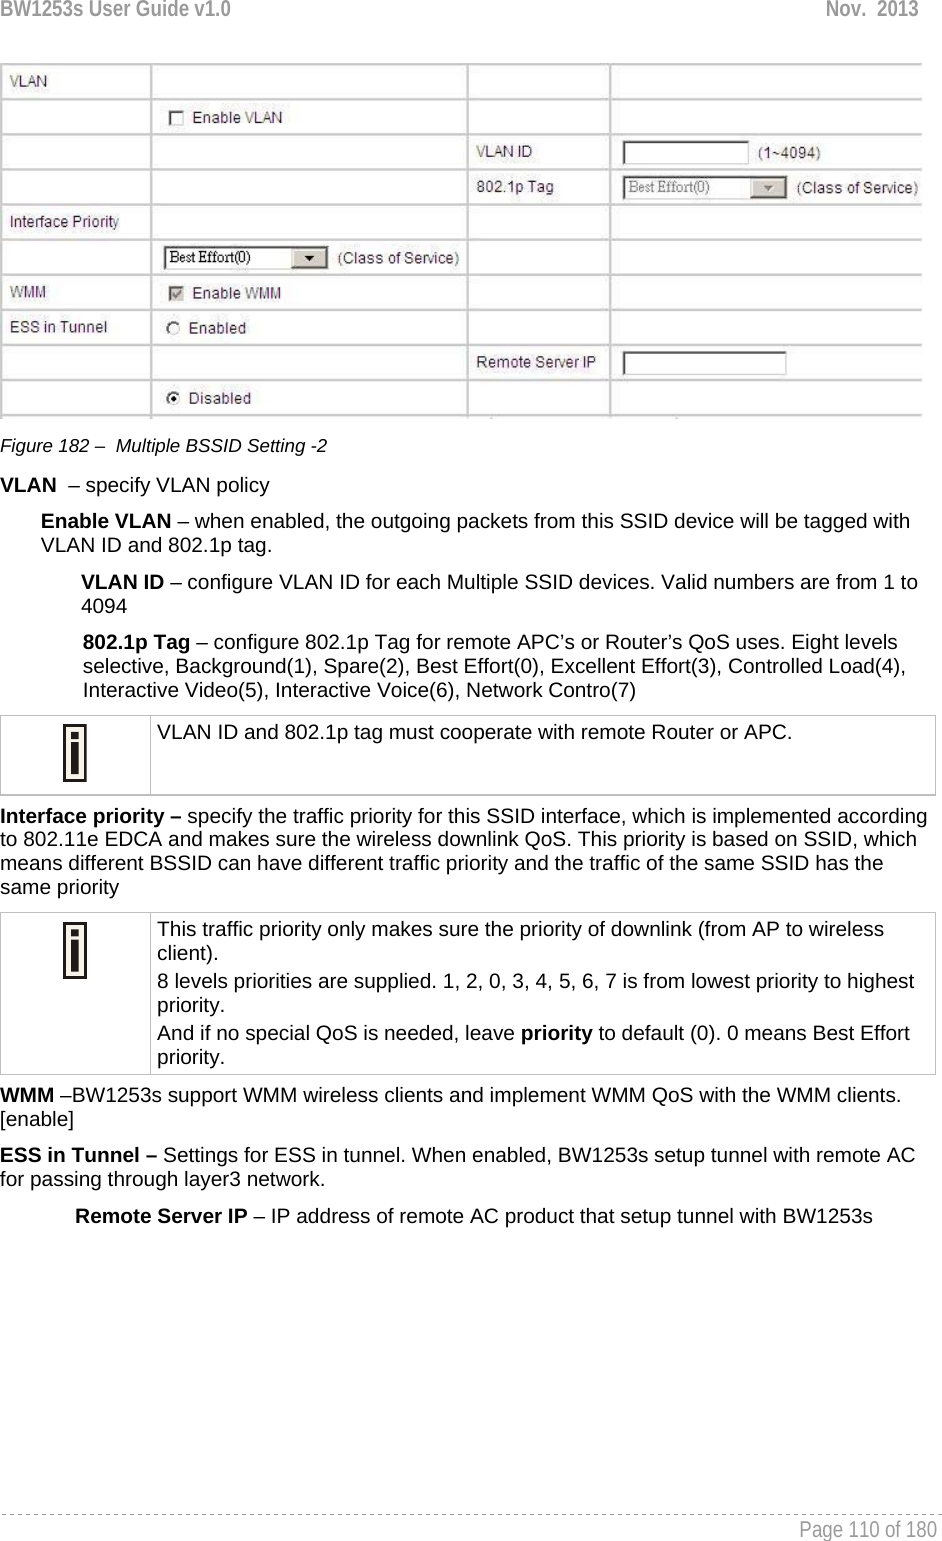 BW1253s User Guide v1.0  Nov.  2013     Page 110 of 180    Figure 182 –  Multiple BSSID Setting -2 VLAN  – specify VLAN policy  Enable VLAN – when enabled, the outgoing packets from this SSID device will be tagged with VLAN ID and 802.1p tag.  VLAN ID – configure VLAN ID for each Multiple SSID devices. Valid numbers are from 1 to 4094 802.1p Tag – configure 802.1p Tag for remote APC’s or Router’s QoS uses. Eight levels selective, Background(1), Spare(2), Best Effort(0), Excellent Effort(3), Controlled Load(4), Interactive Video(5), Interactive Voice(6), Network Contro(7)  VLAN ID and 802.1p tag must cooperate with remote Router or APC.  Interface priority – specify the traffic priority for this SSID interface, which is implemented according to 802.11e EDCA and makes sure the wireless downlink QoS. This priority is based on SSID, which means different BSSID can have different traffic priority and the traffic of the same SSID has the same priority  This traffic priority only makes sure the priority of downlink (from AP to wireless client). 8 levels priorities are supplied. 1, 2, 0, 3, 4, 5, 6, 7 is from lowest priority to highest priority.  And if no special QoS is needed, leave priority to default (0). 0 means Best Effort priority.  WMM –BW1253s support WMM wireless clients and implement WMM QoS with the WMM clients. [enable] ESS in Tunnel – Settings for ESS in tunnel. When enabled, BW1253s setup tunnel with remote AC for passing through layer3 network.  Remote Server IP – IP address of remote AC product that setup tunnel with BW1253s 